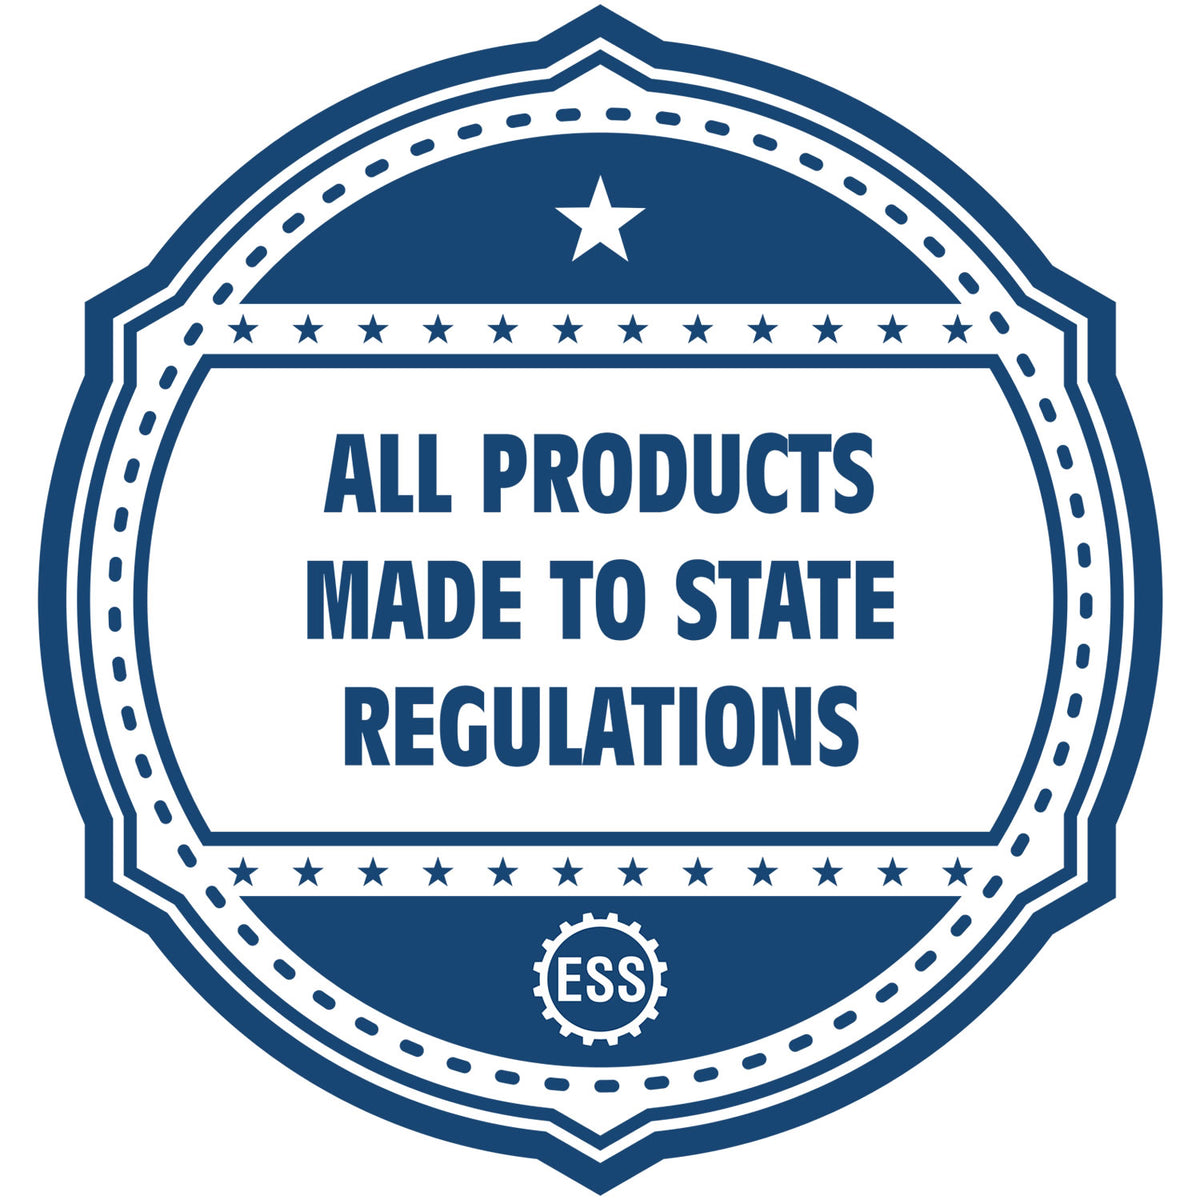 A blue icon or badge for the Missouri Professional Geologist Seal Stamp showing that this product is made in compliance with state regulations.